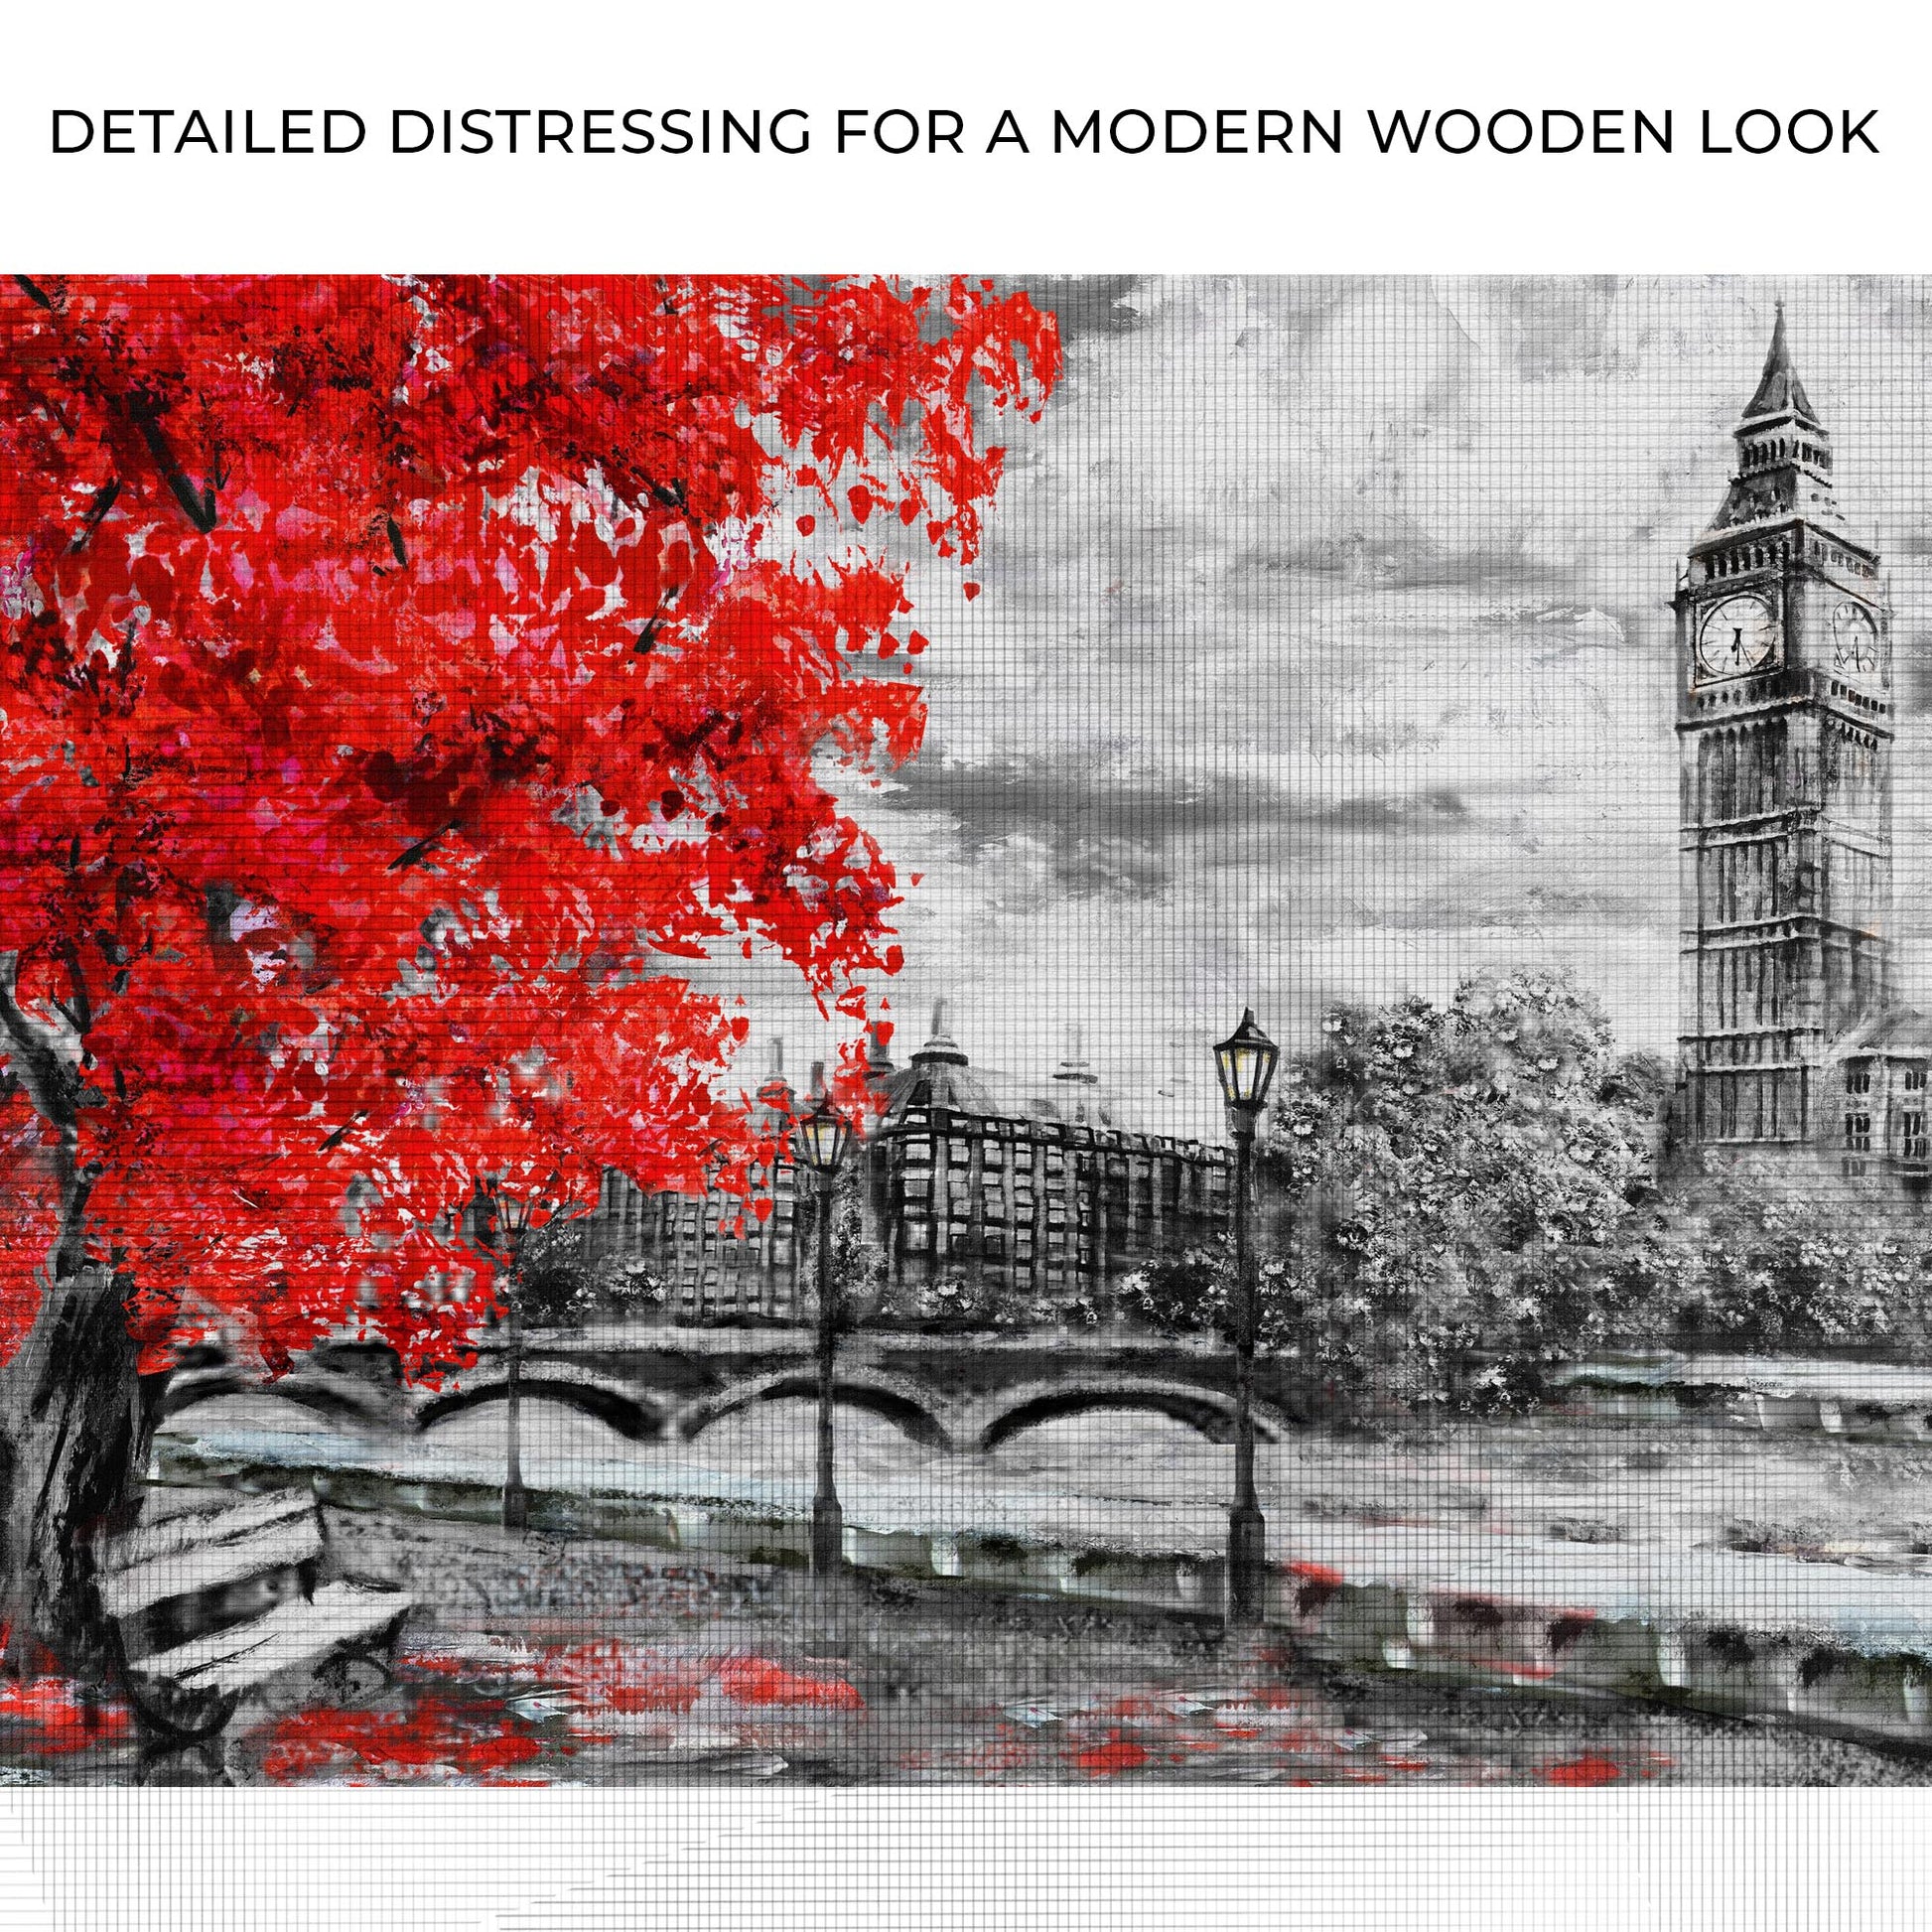 Stunning Red Autumn Tree Wall Art Canvas Zoom - Image by Tailored Canvases